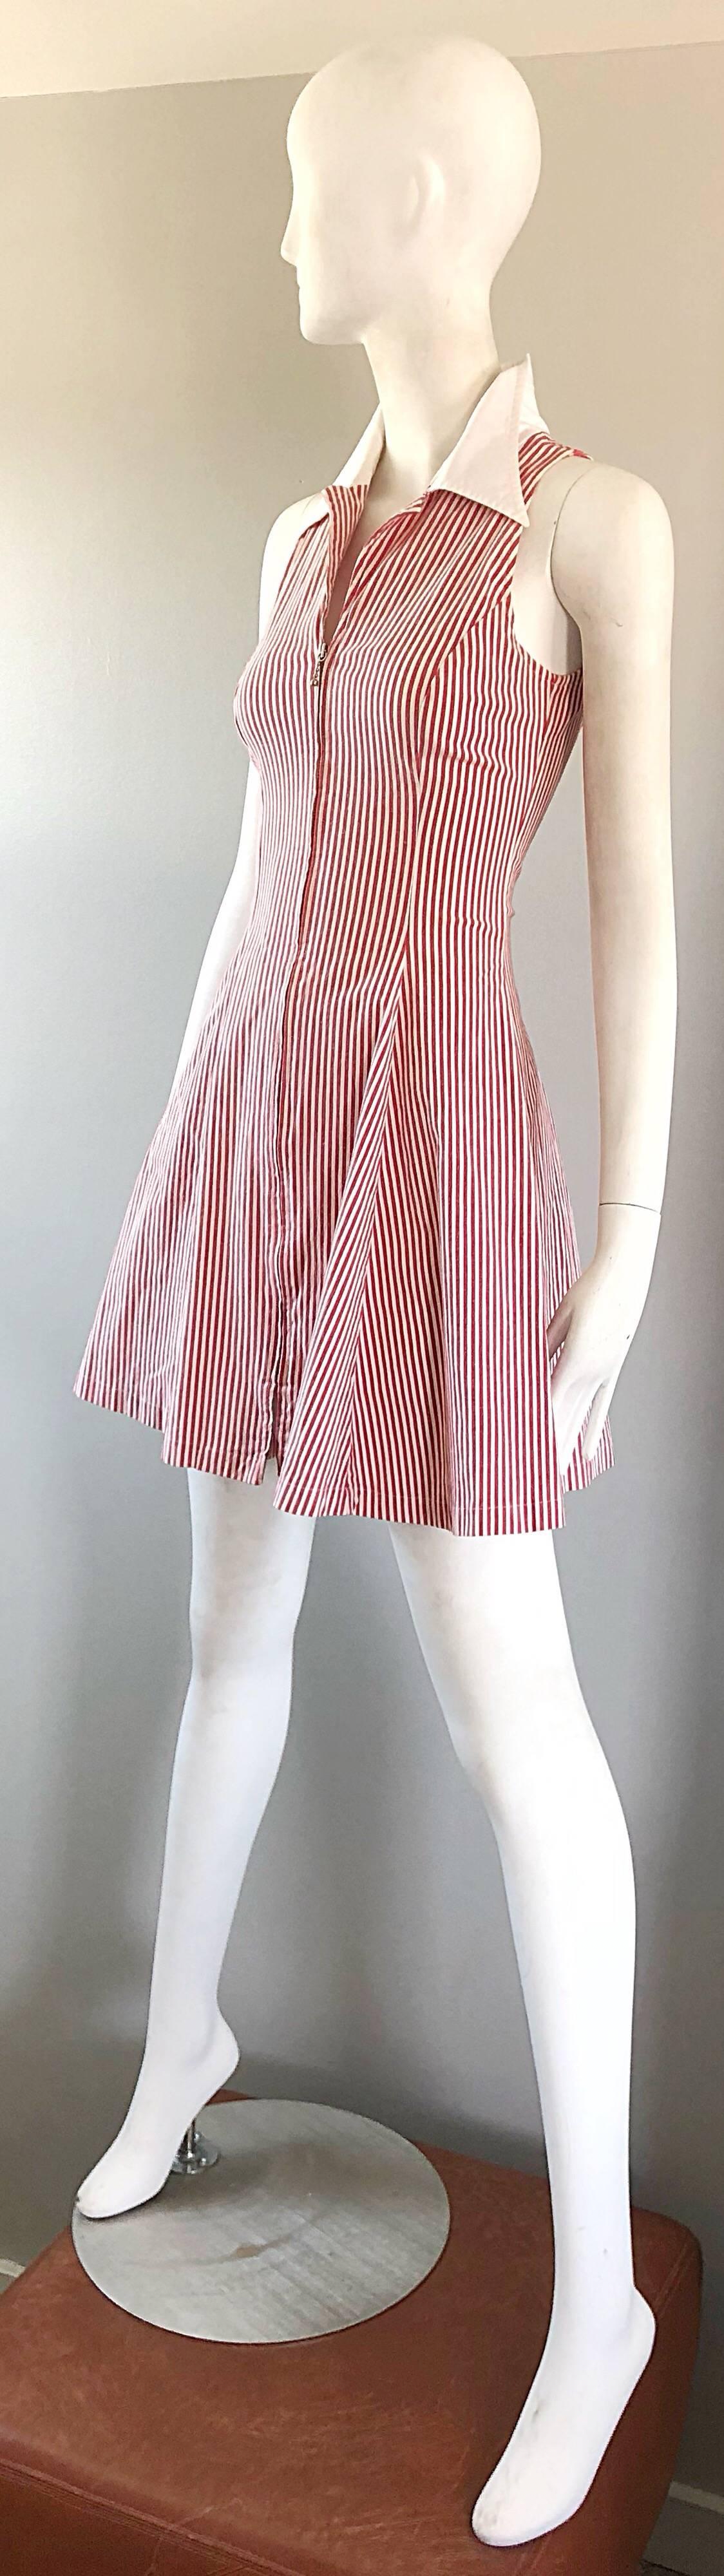 1980s Angelo Tarlazzi Vintage Red and White Seersucker Nautical Striped Dress  For Sale 3